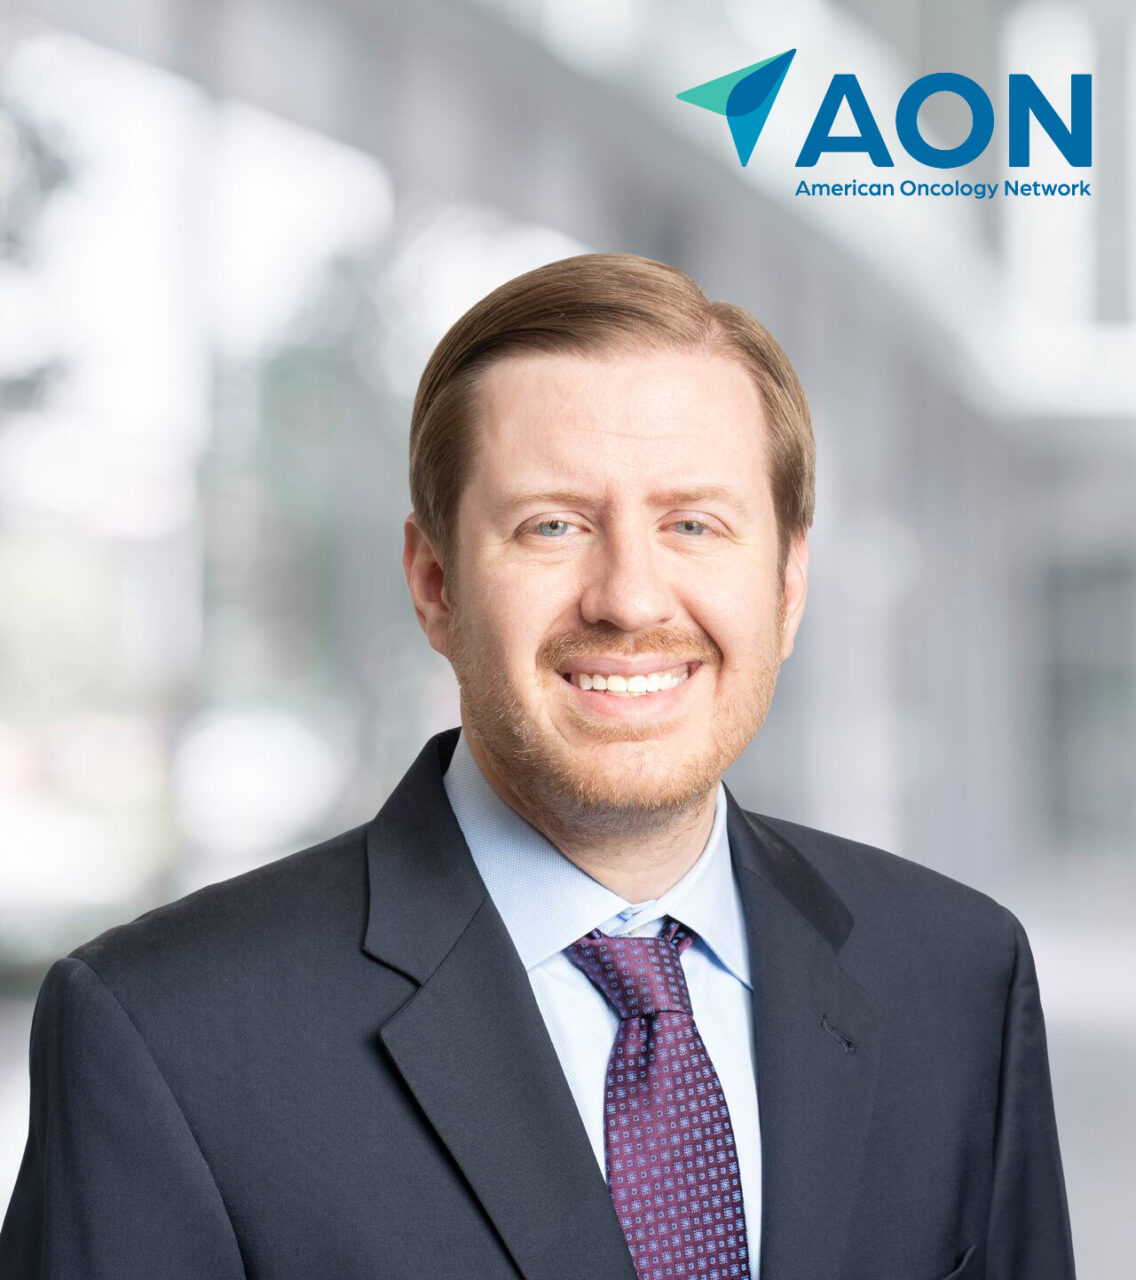 Brian Mulherin has been appointed to serve as AON’s new Medical Director – American Oncology Network